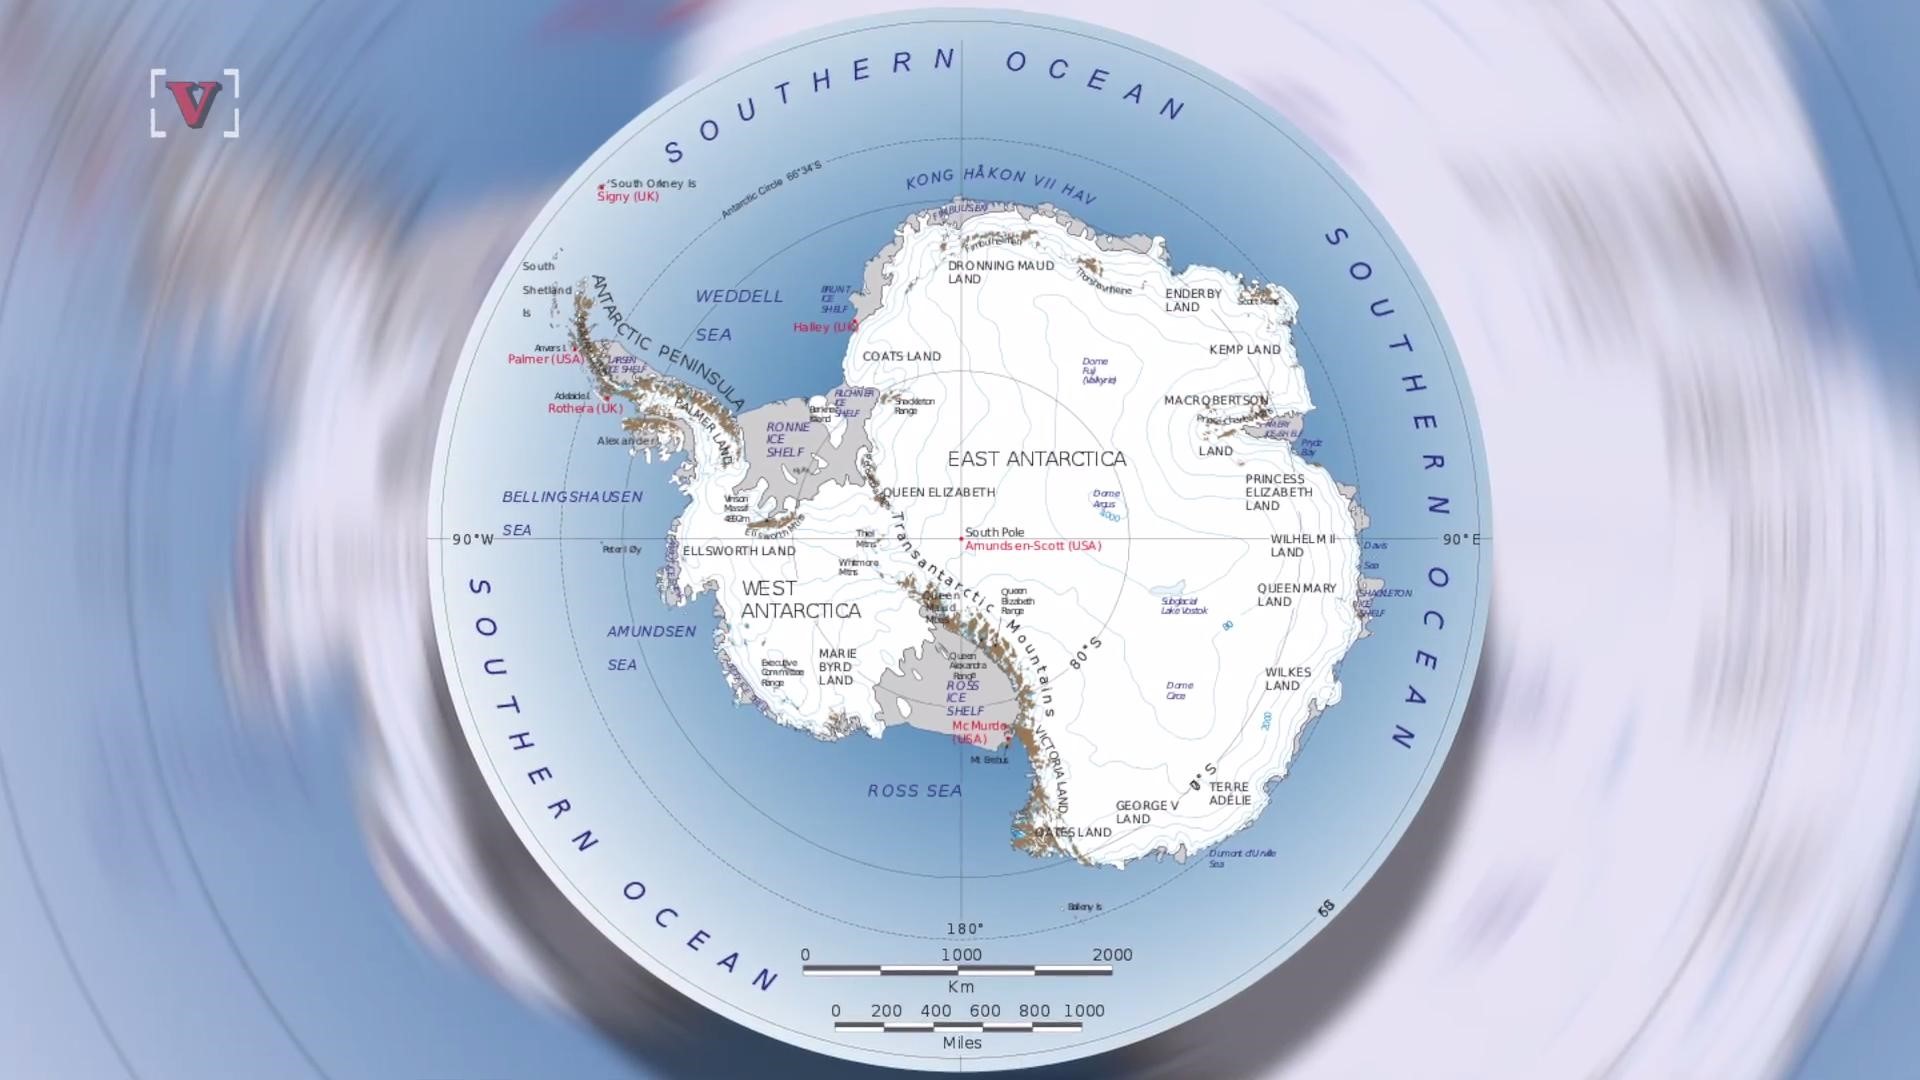 Antarctica's ice shelves are melting from the warming ocean waters below. Veuer's Sam Berman has the full story.